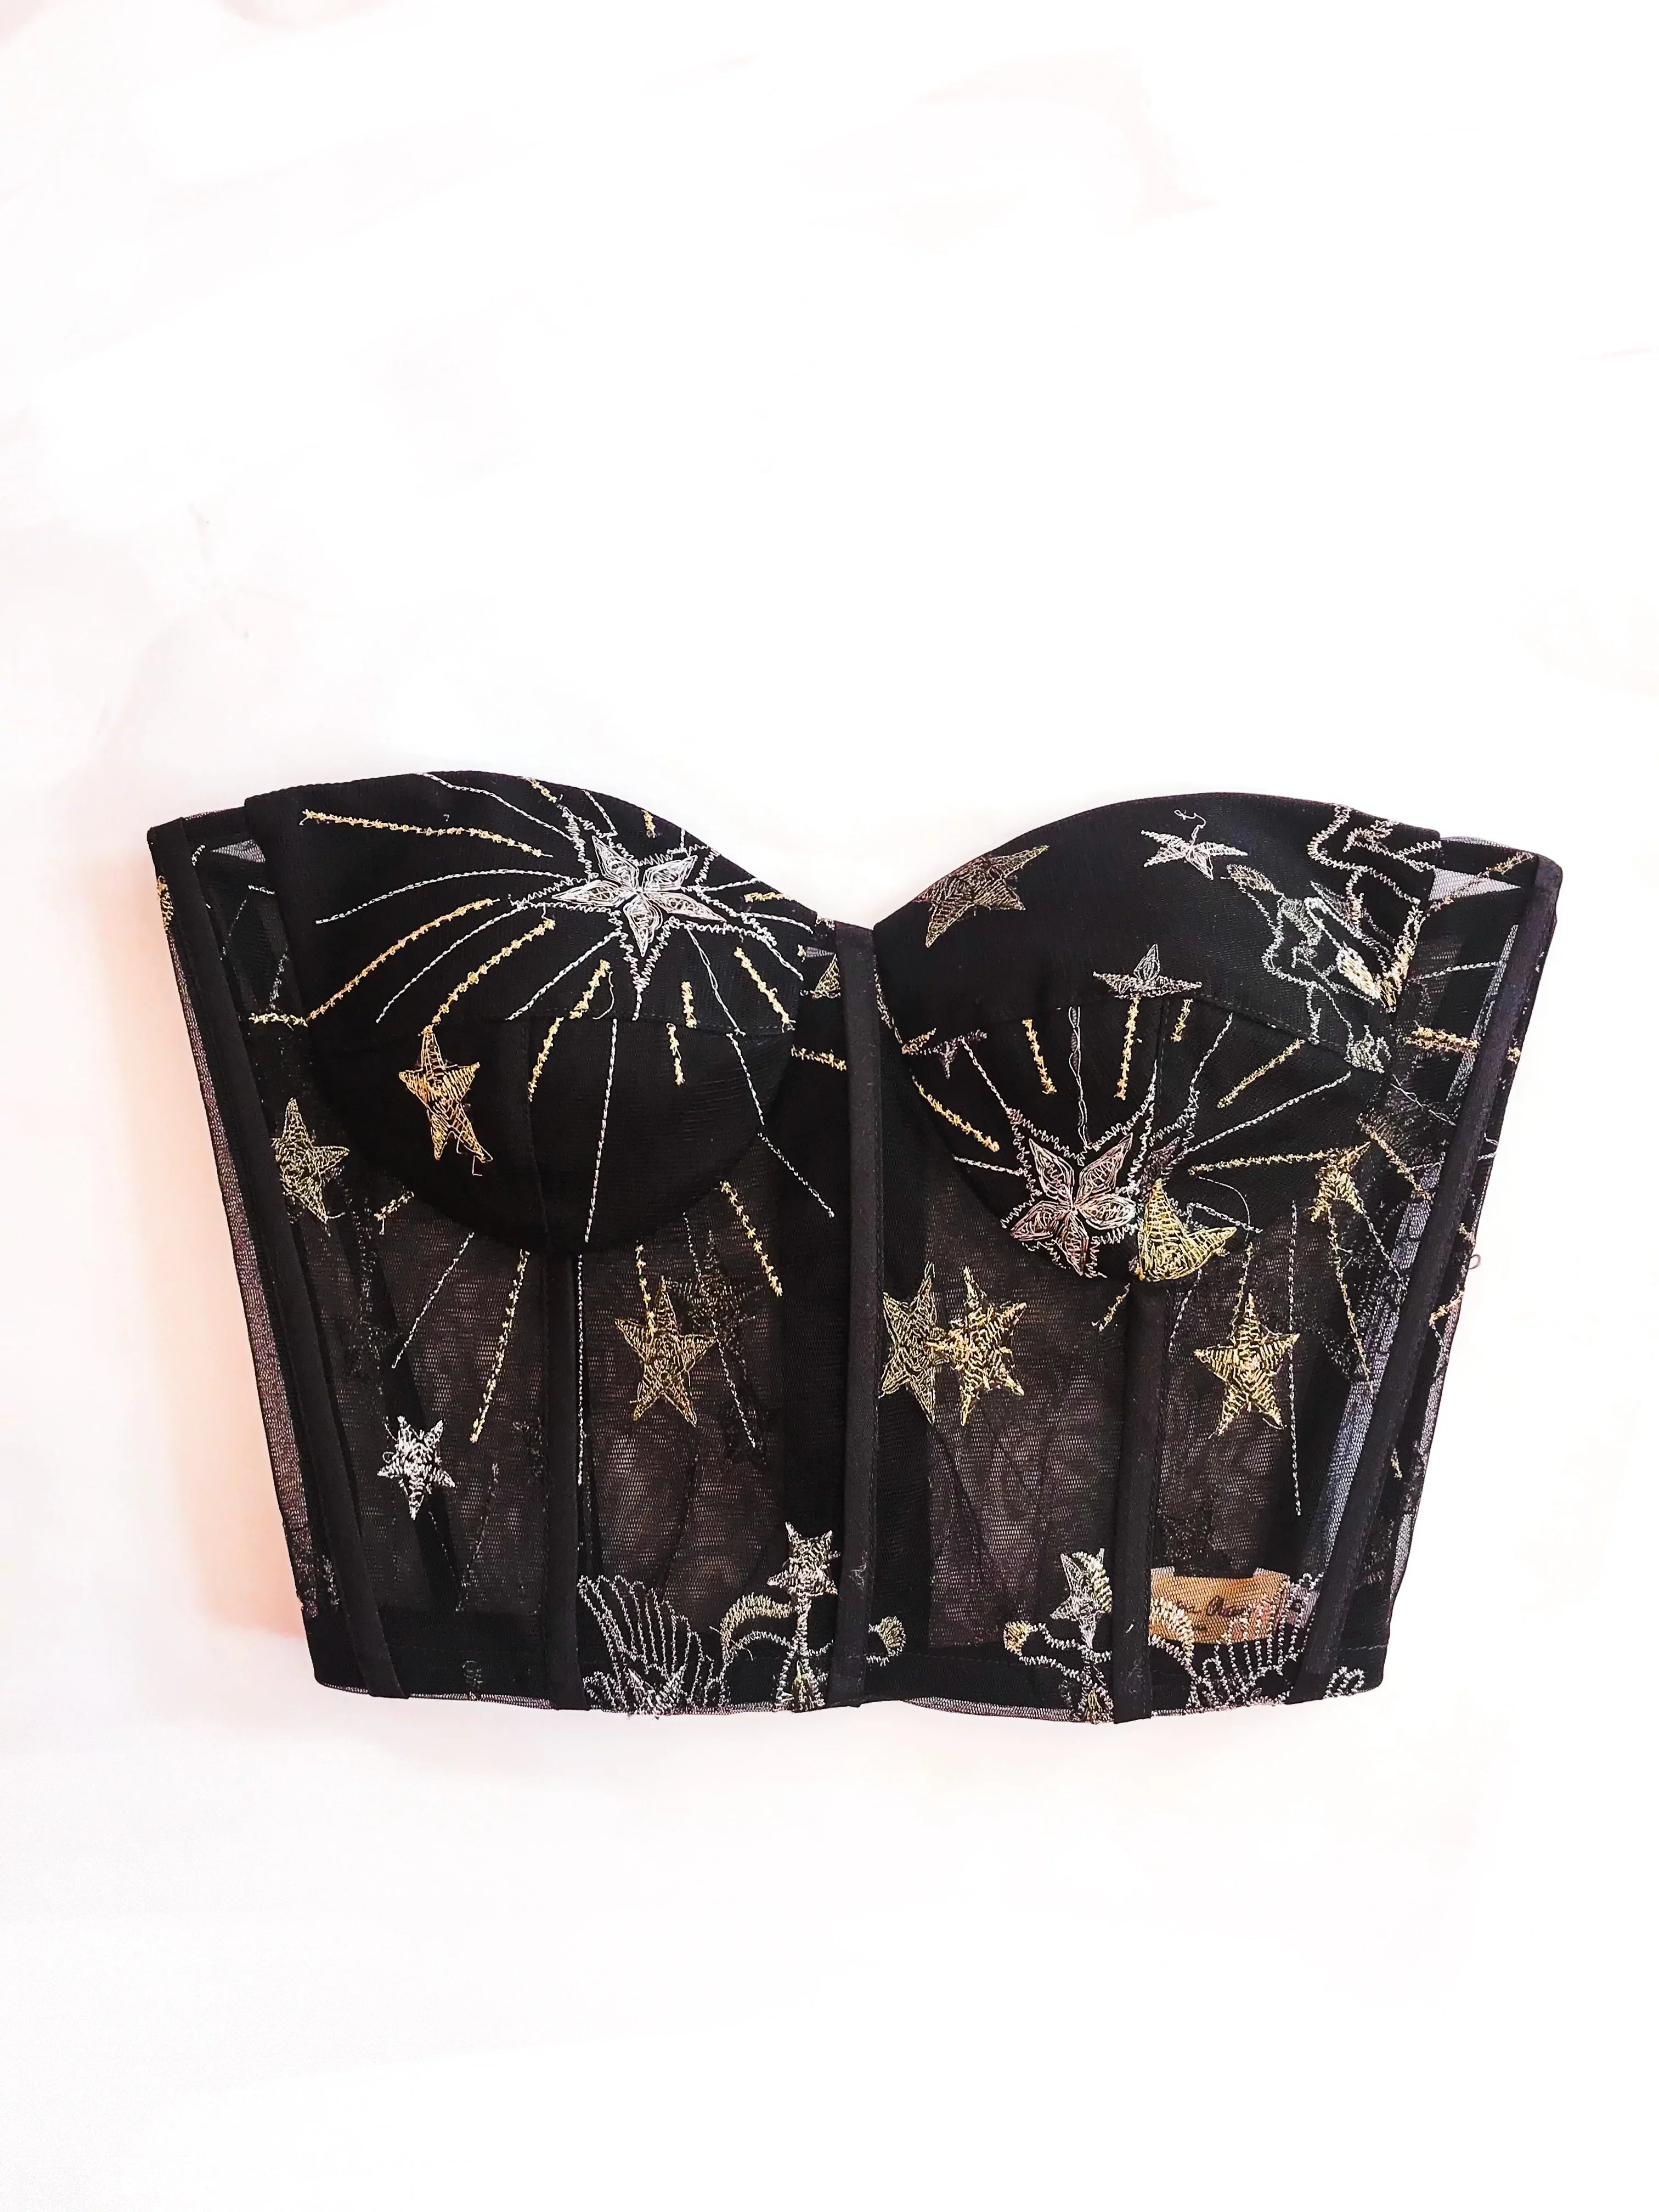 Constellations Black Long Bustier With Removable Straps Made to Measure Cup B IMMEDIATE SHIPPING/DELIVERY